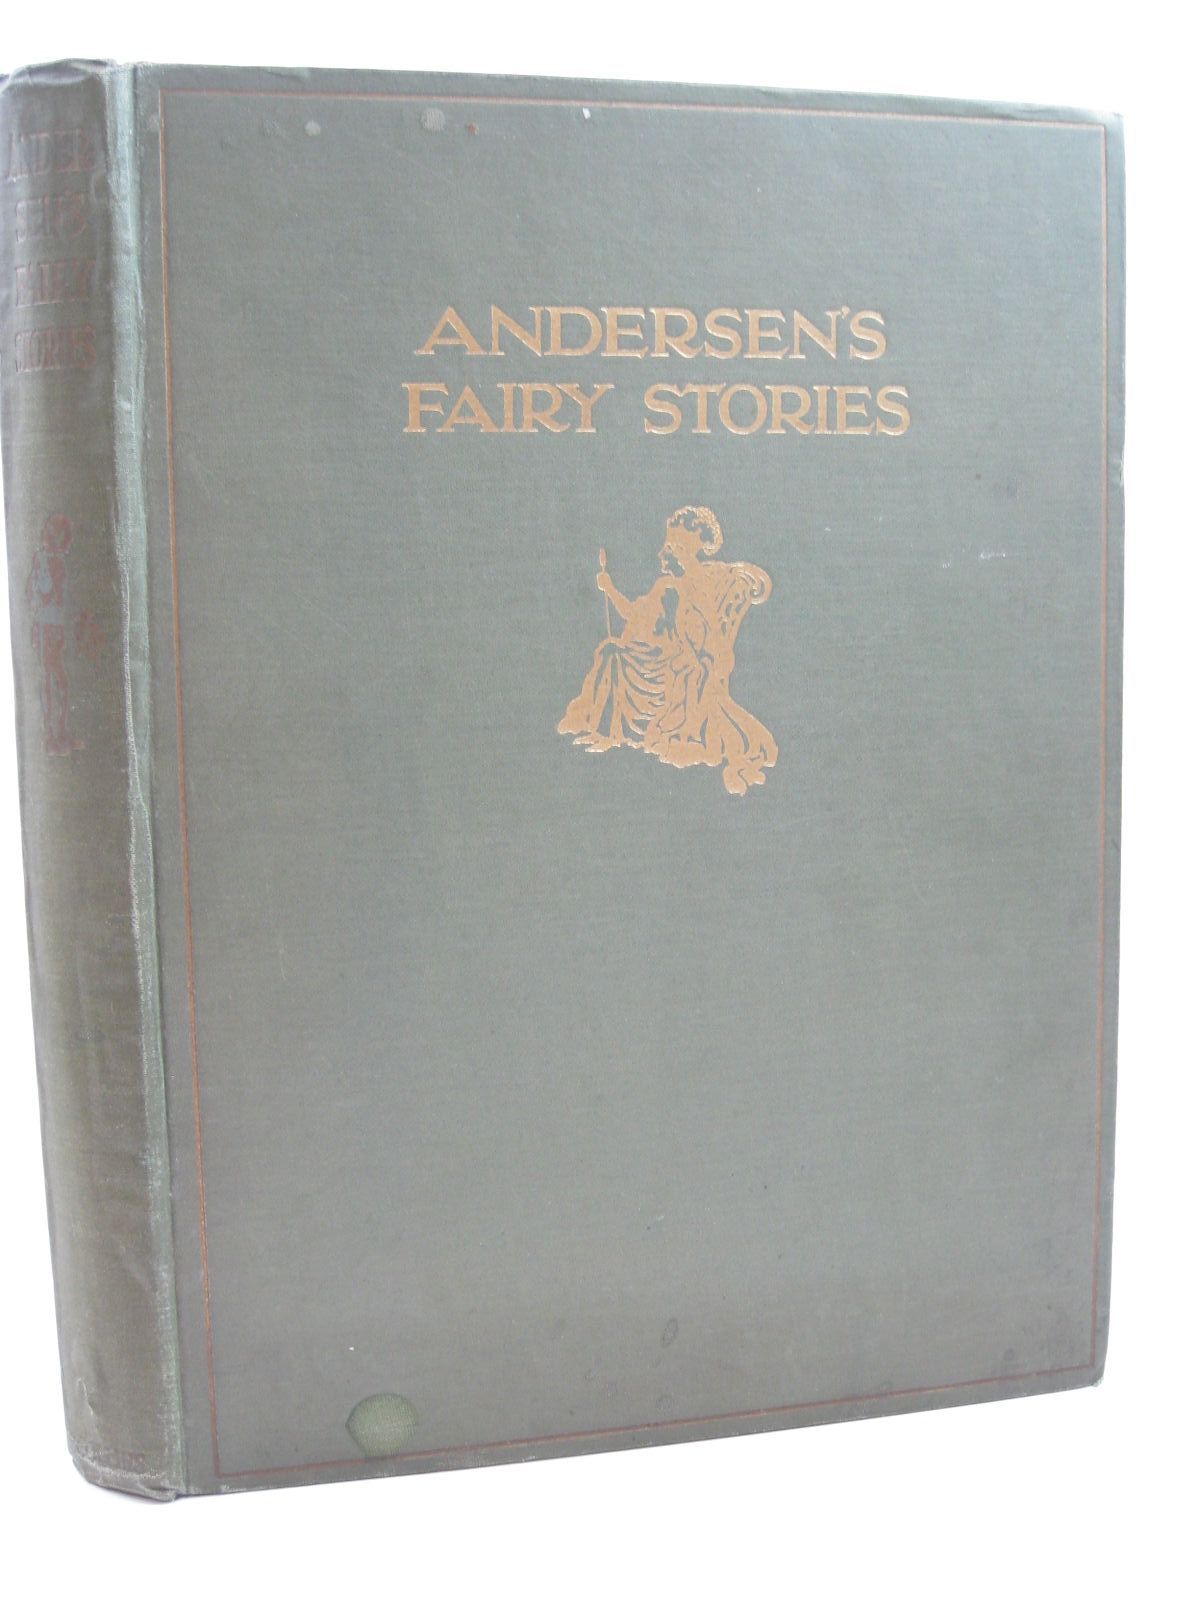 Photo of HANS ANDERSEN'S FAIRY STORIES written by Andersen, Hans Christian illustrated by Anderson, Anne published by Collins Clear-Type Press (STOCK CODE: 1507235)  for sale by Stella & Rose's Books